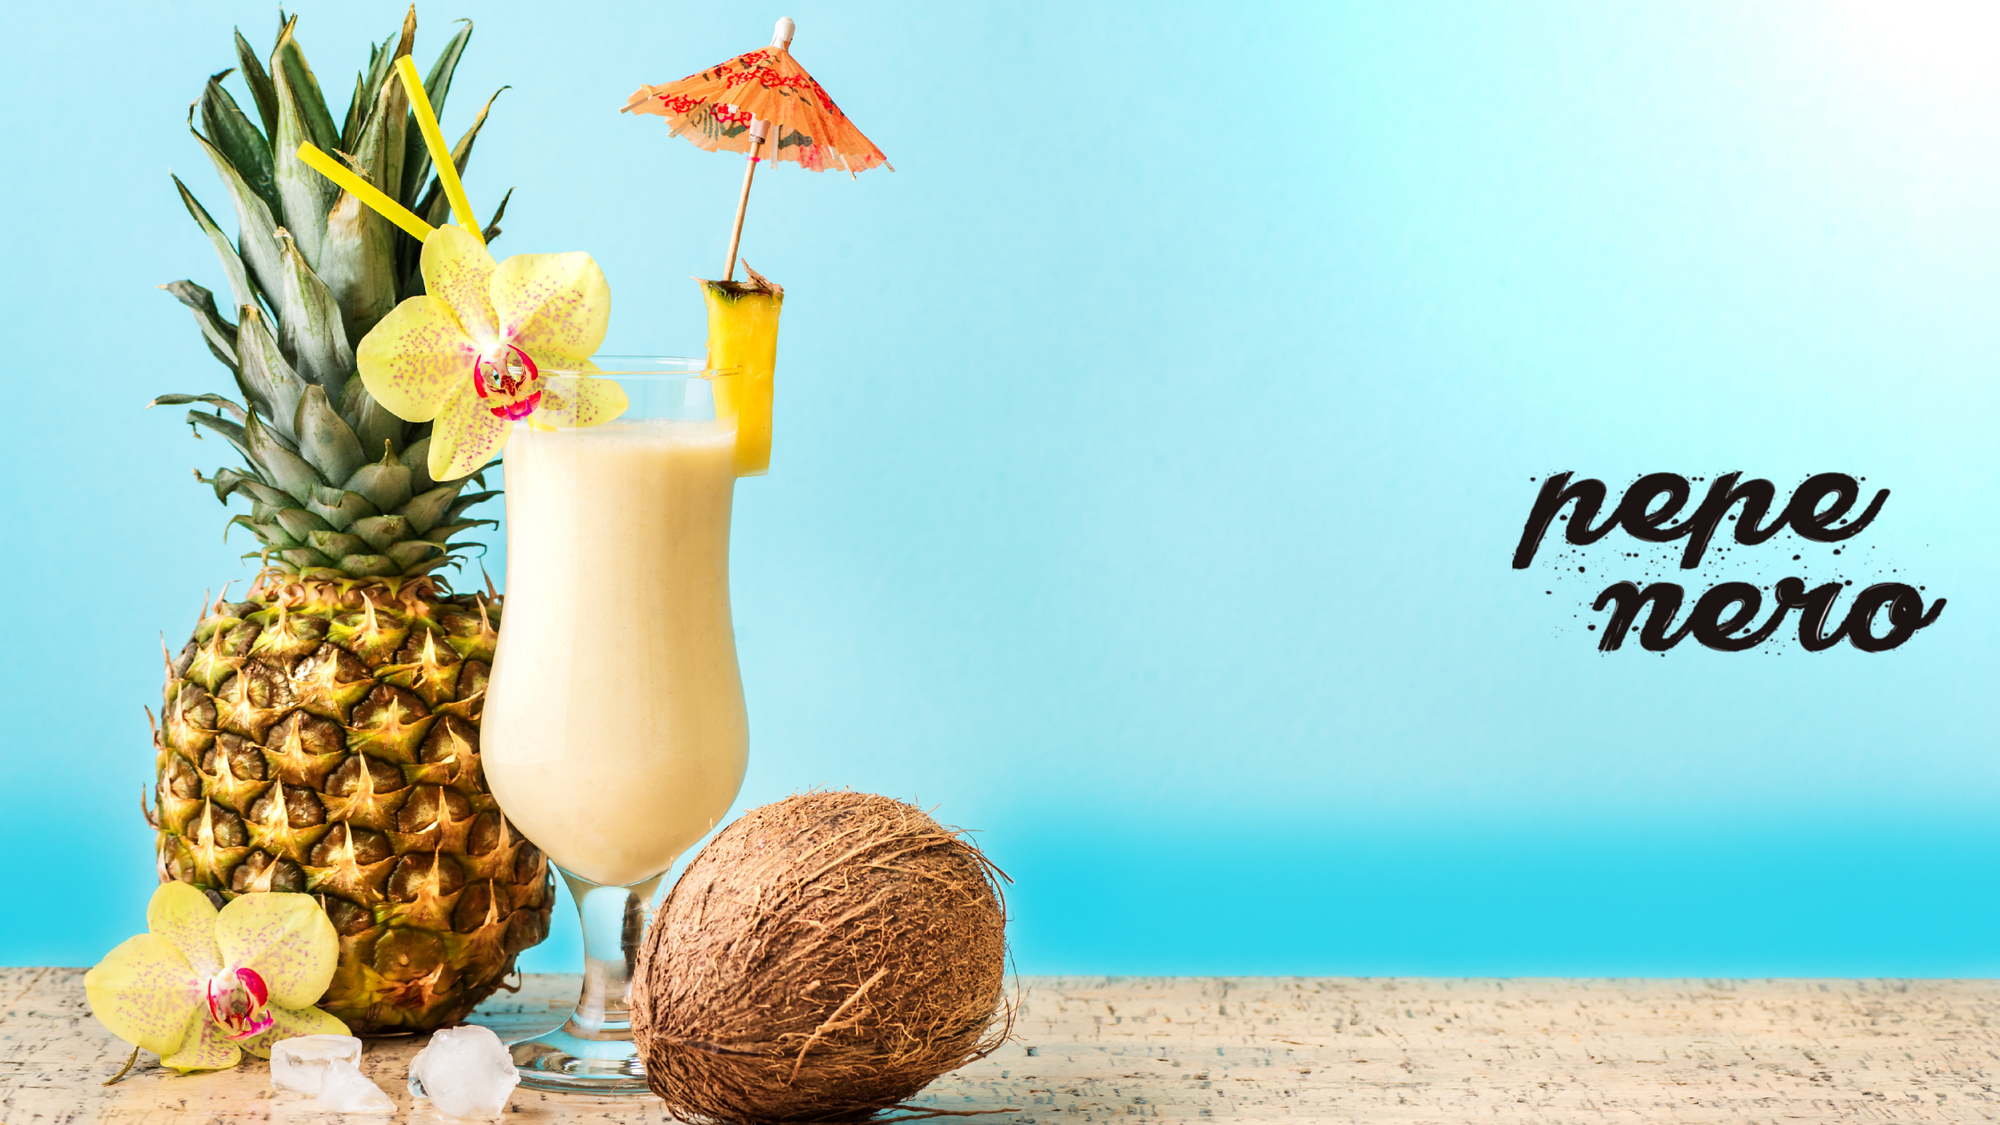 A pineapple and coconut next to a Piña Colada with a paper umbrella